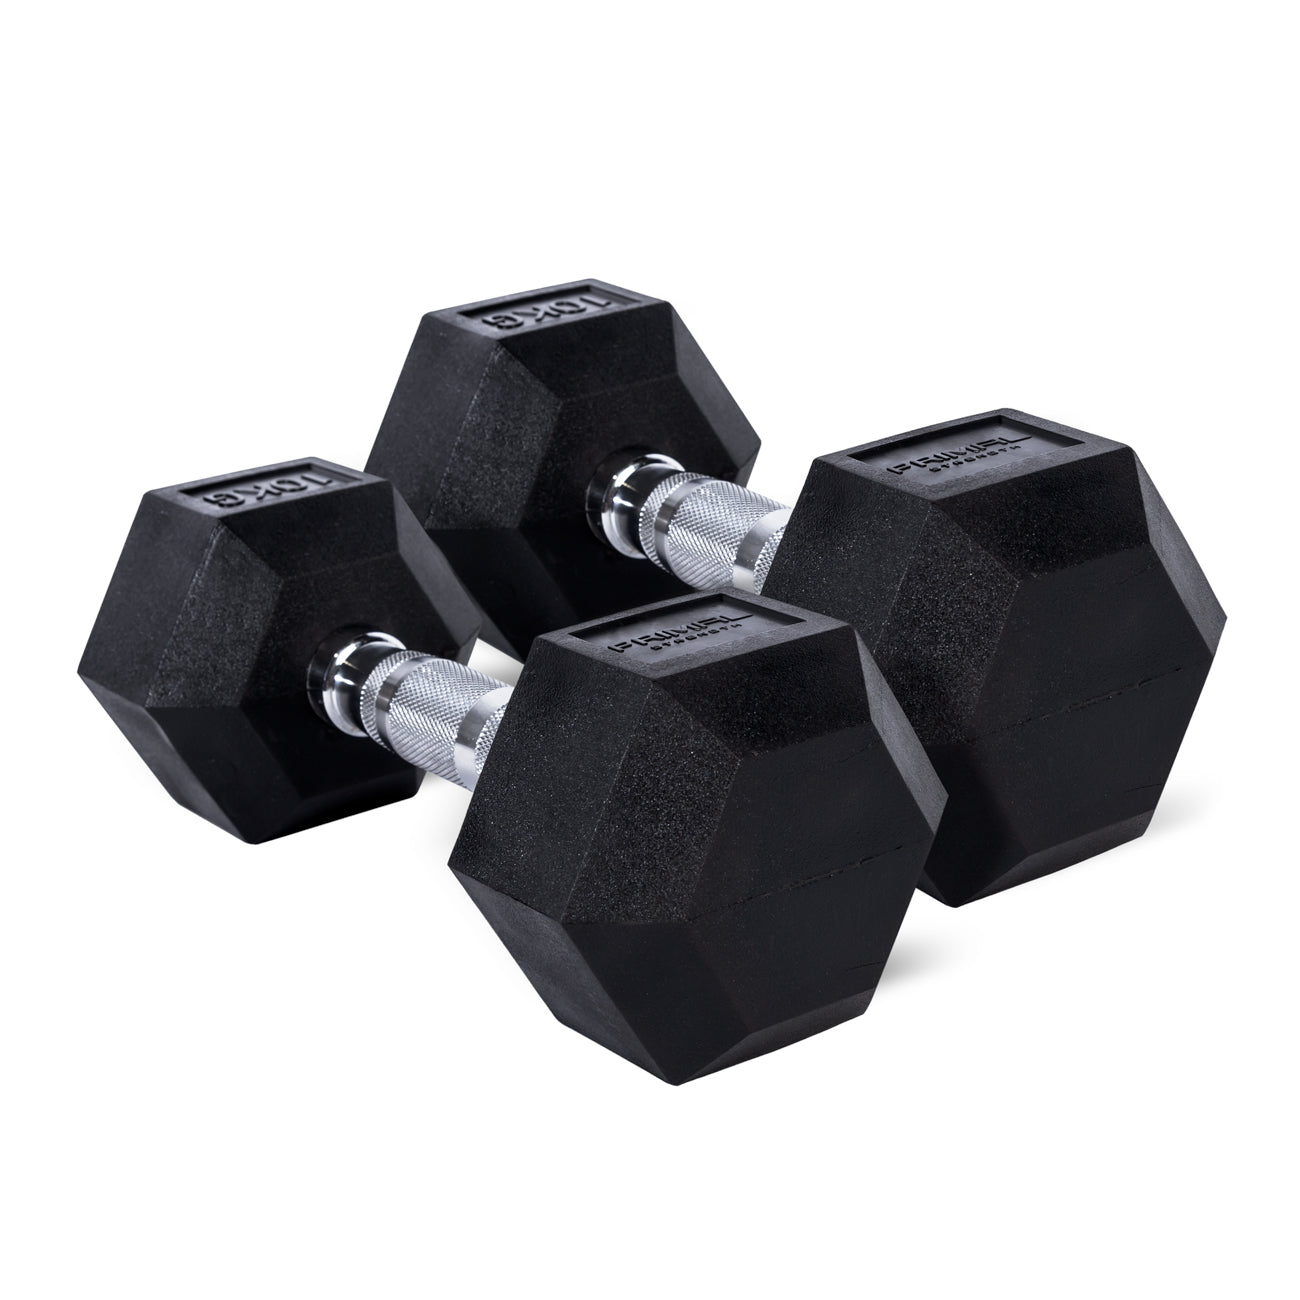 Buy Sportsfuel Professional Exercise Hex Dumbbells for Home Gym Equipment  Home Workout, Gym Dumbbells Easy Grip & Anti- Slip Dumbbells Dumbbells Set  and Fitness Kit for Men and Women Whole Body Workout (